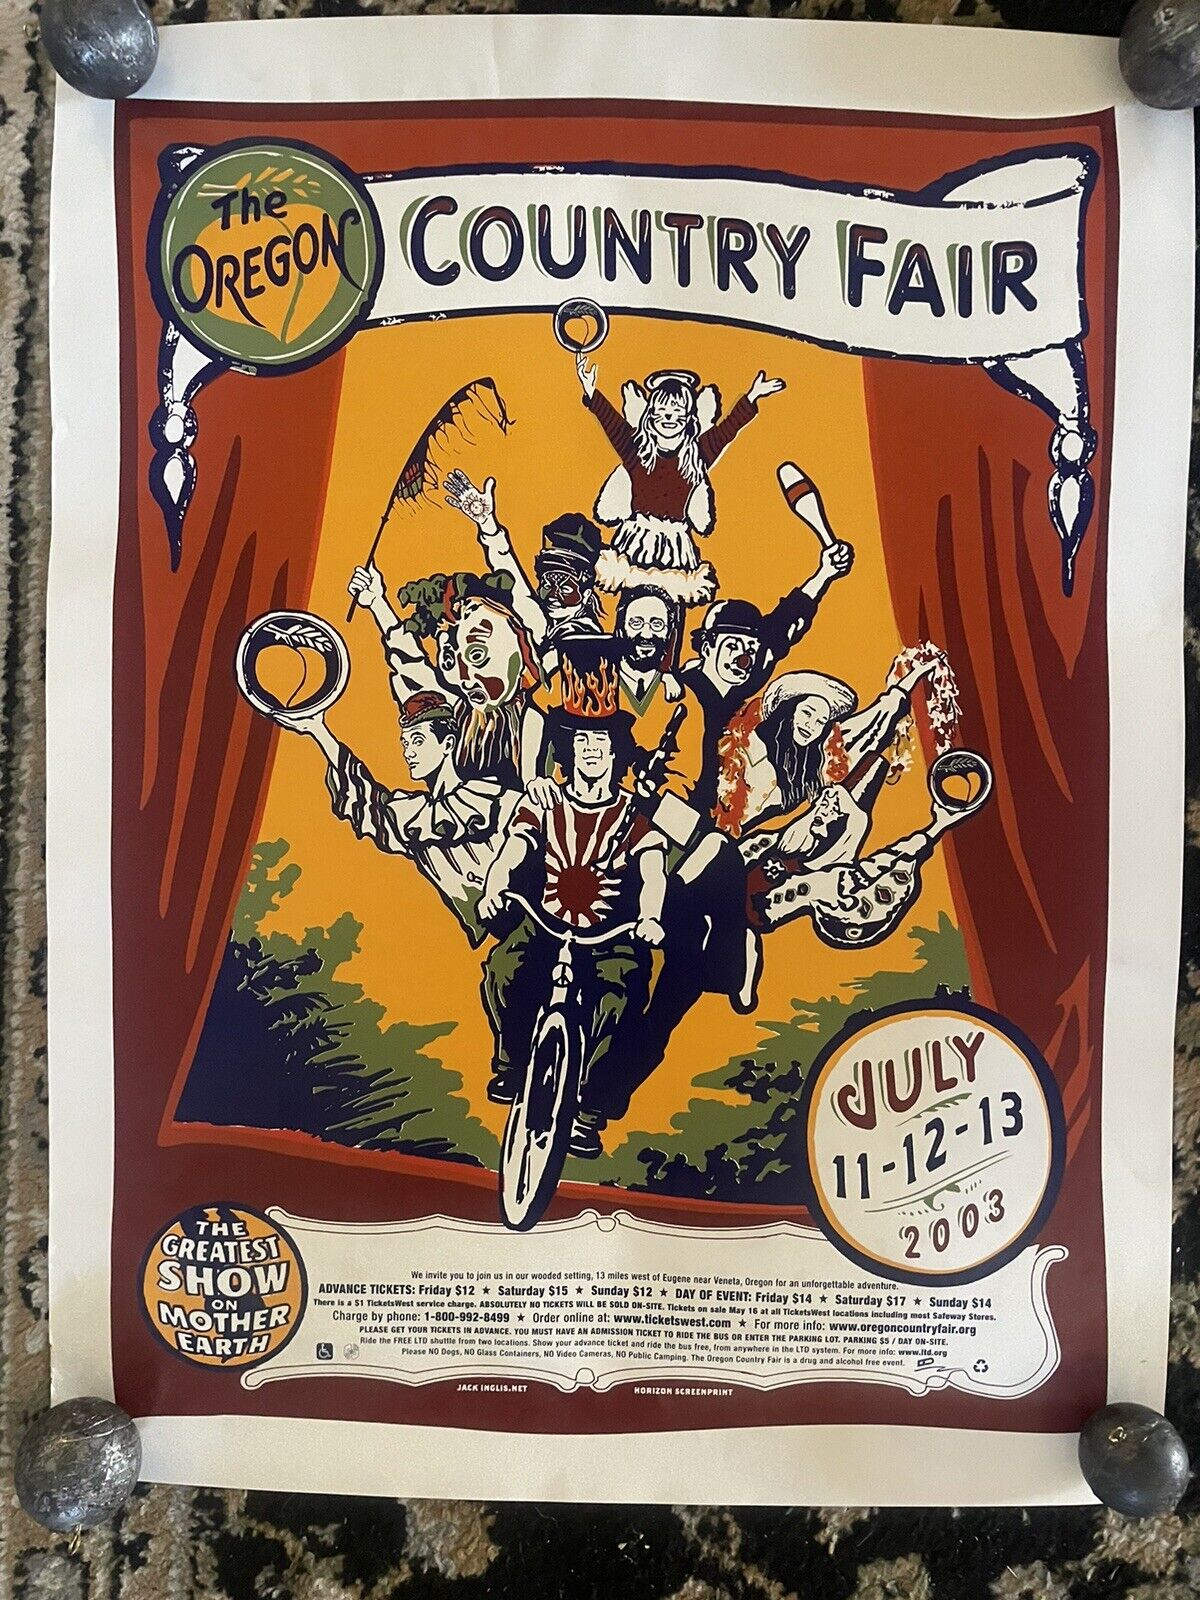 Vintage 2003 Oregon Country Fair Poster “ Greatest Show On Mother Earth”